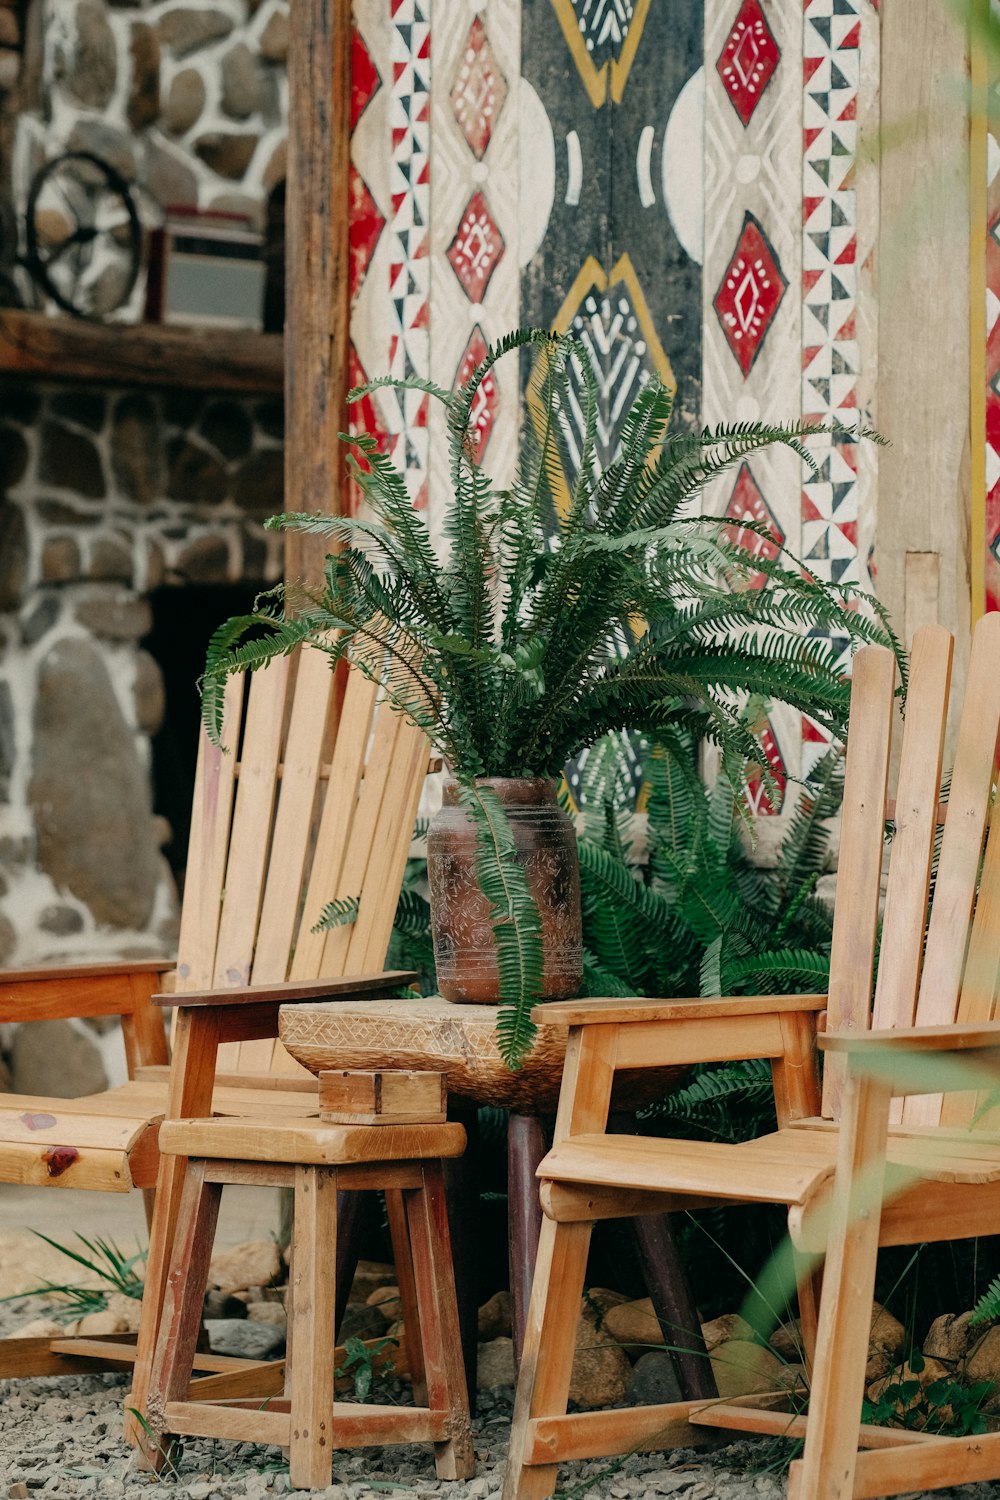 a couple of wooden chairs sitting next to a potted plant